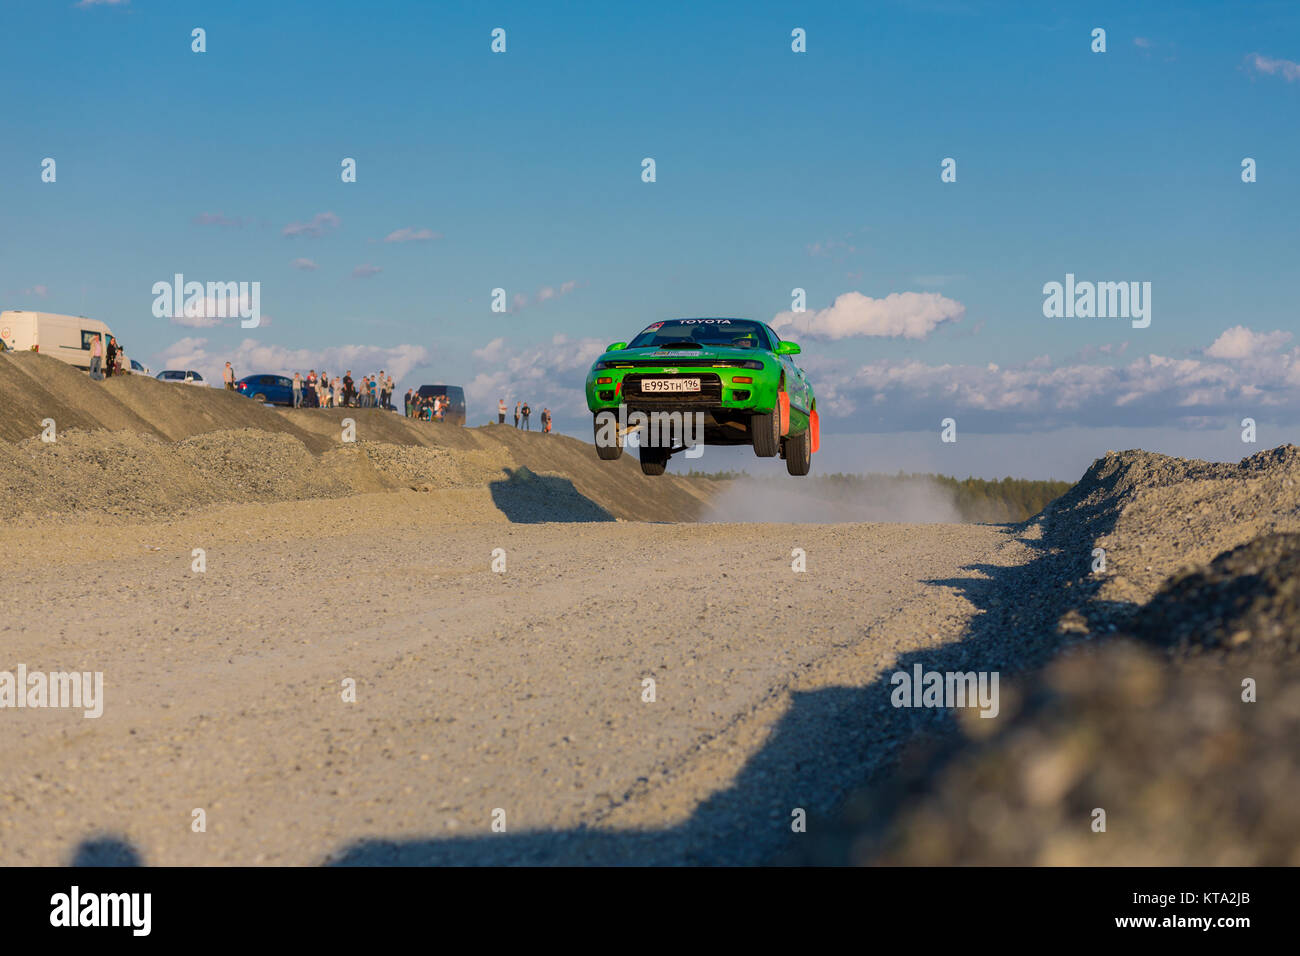 Asbest, Russia, September 16, 2017 - 16th stage of Russian Cup 2017 rally 'Stilobite 2017', Toyota Celica GT-FOUR, driver unknown, starting number 23 Stock Photo